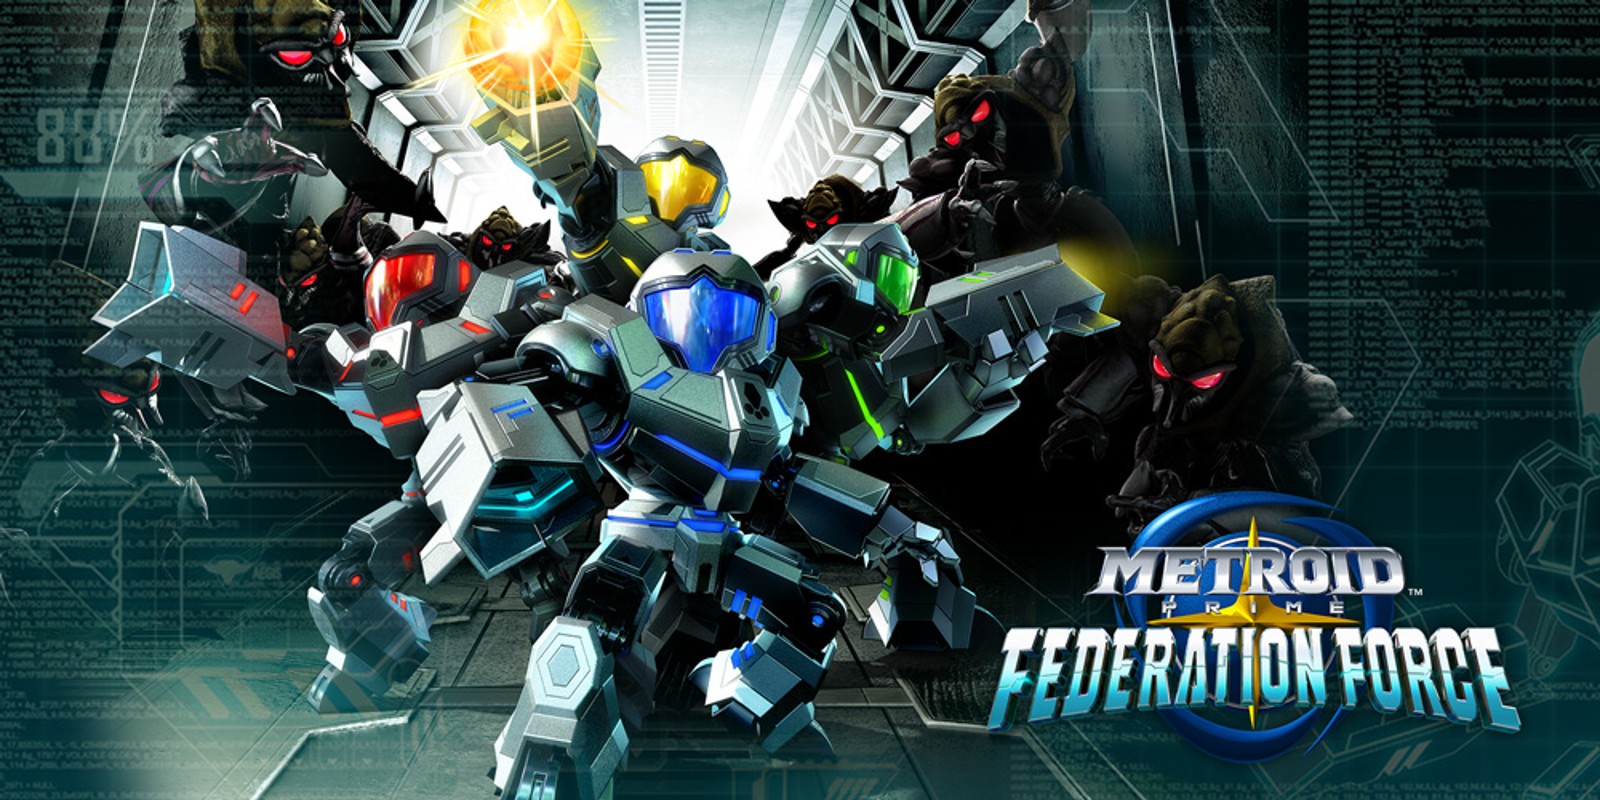 metroid prime federation force 3ds